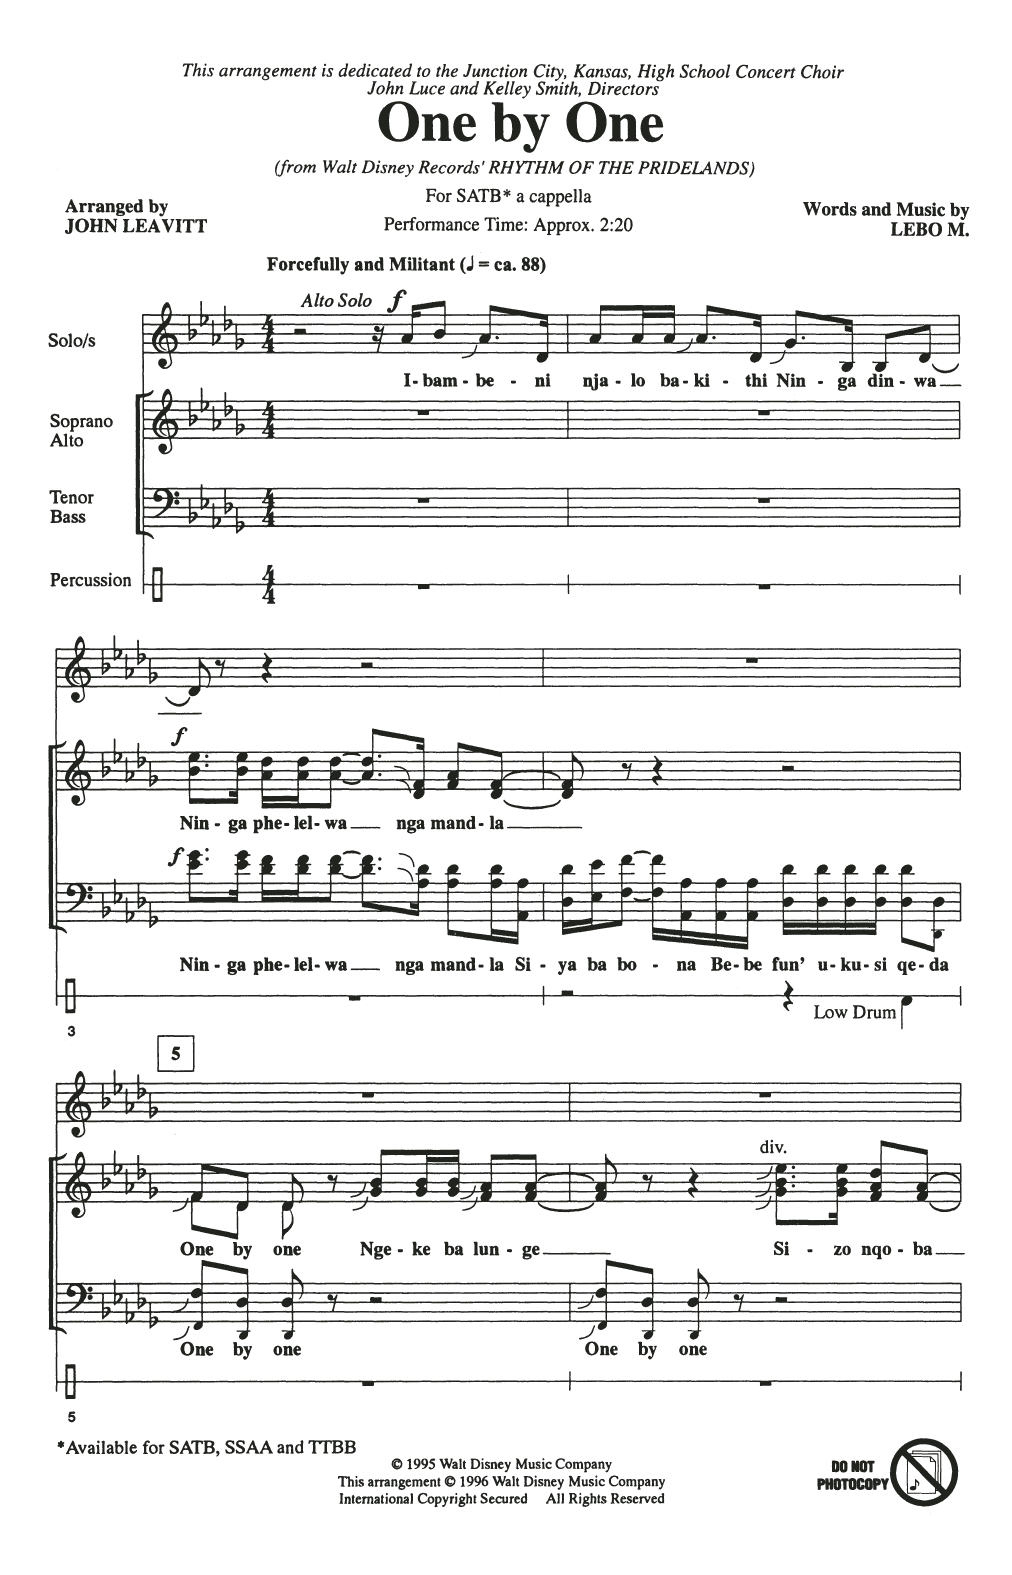 Download Lebo M. One By One (from Rhythm of the Pridelan Sheet Music